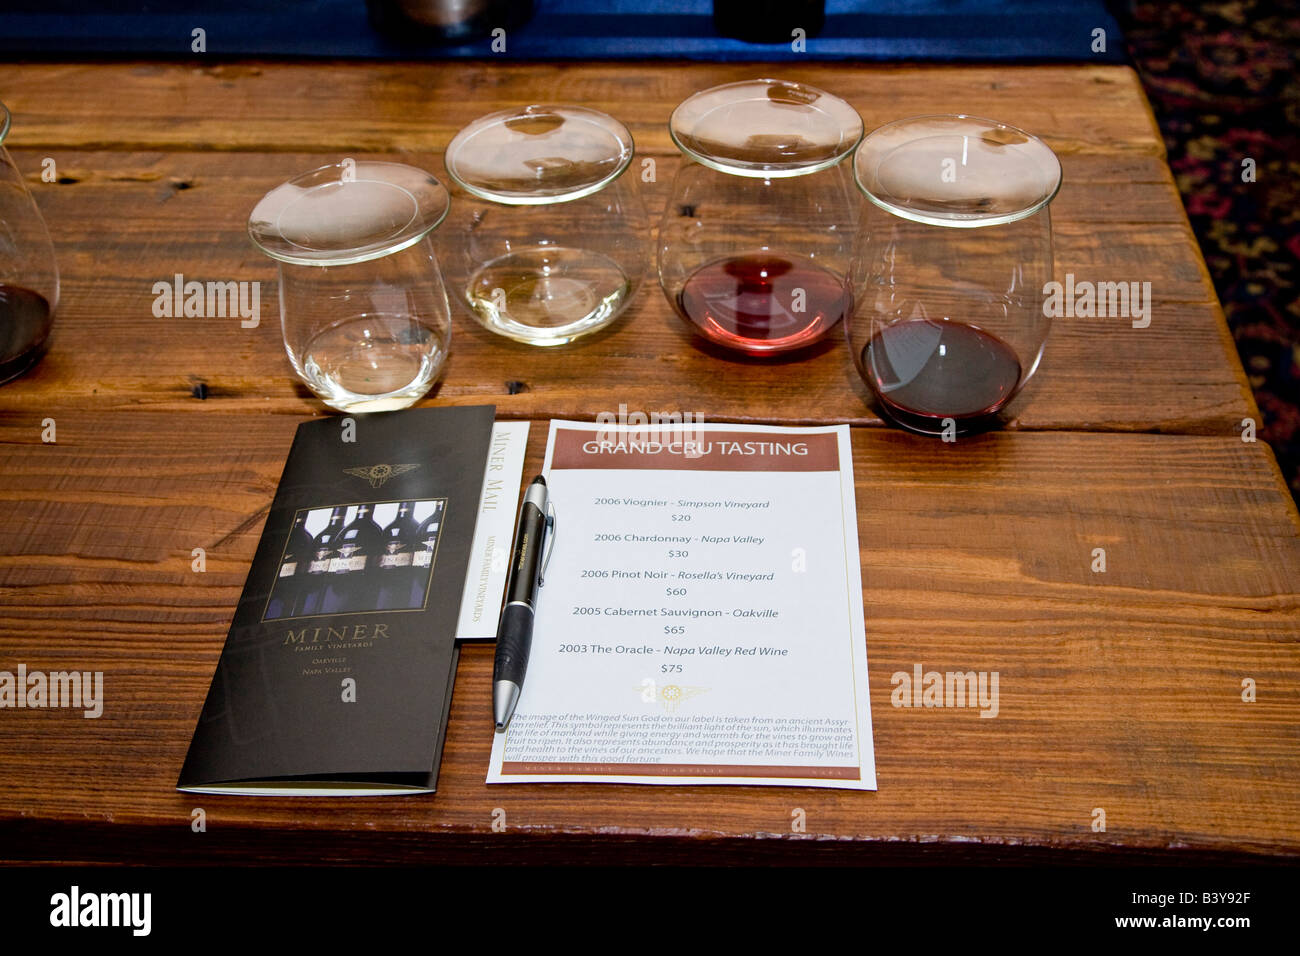 USA, California, Napa Valley. Wines poured for tasting at Miner Vineyards. Stock Photo